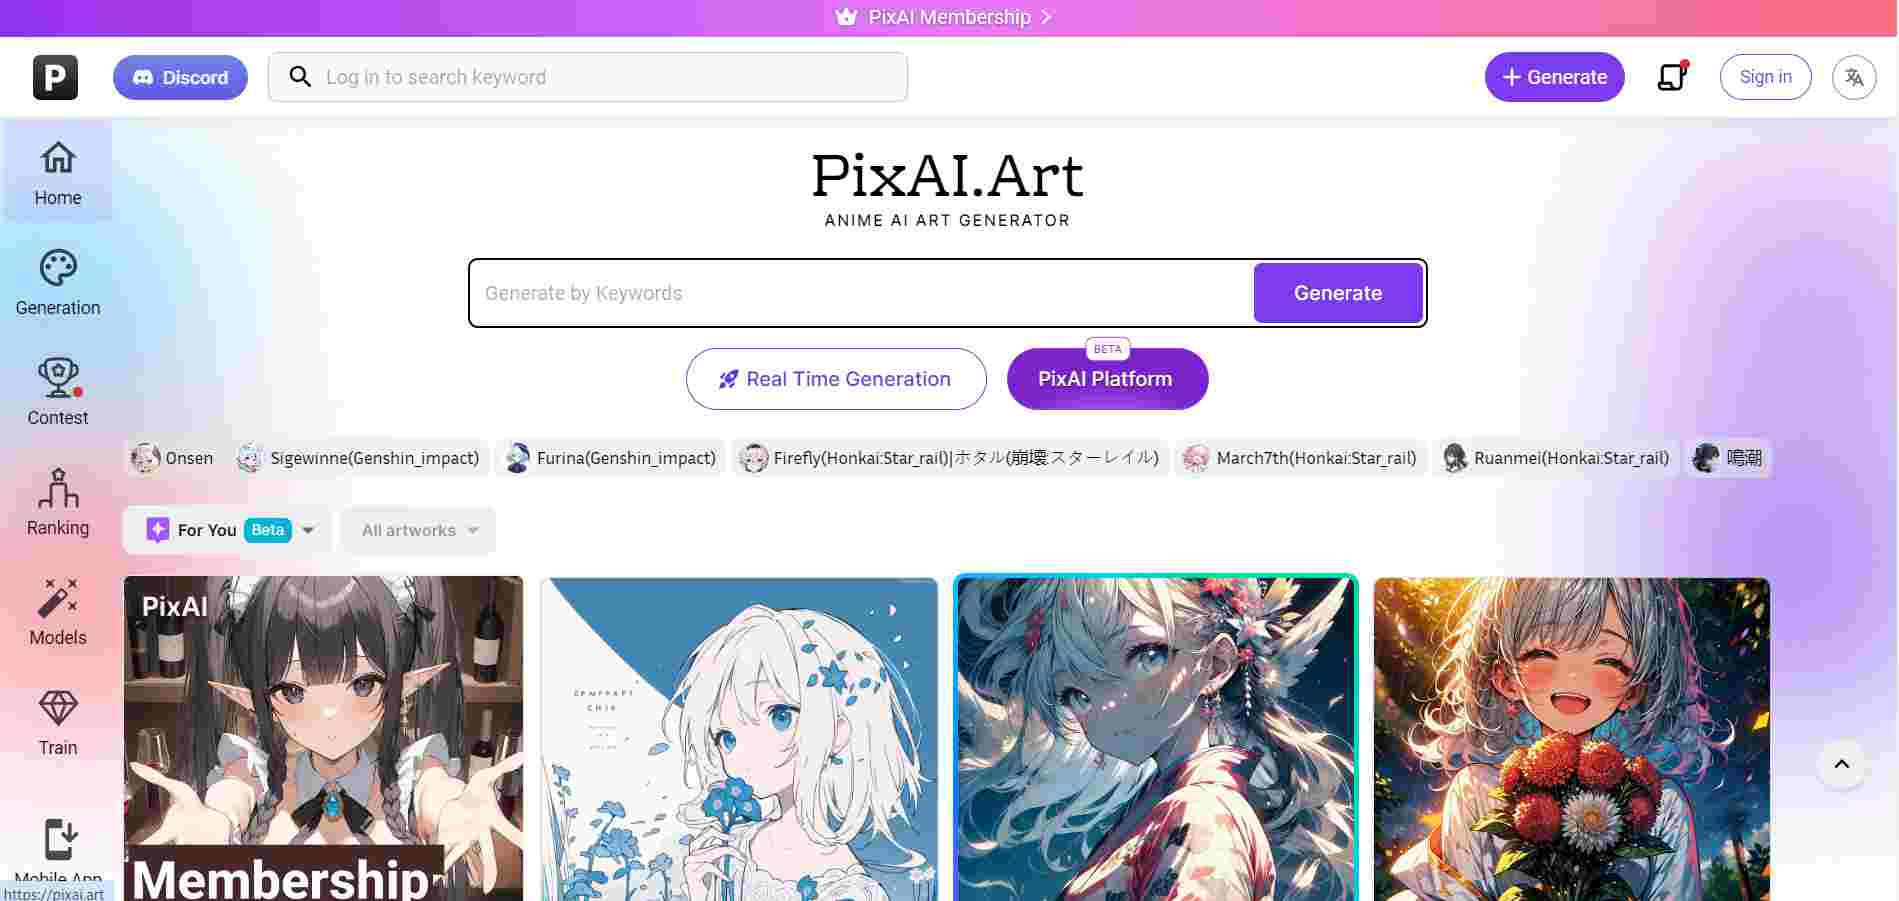 pixai.art-homepage-showing-various-anime-artworks-and-search-bar